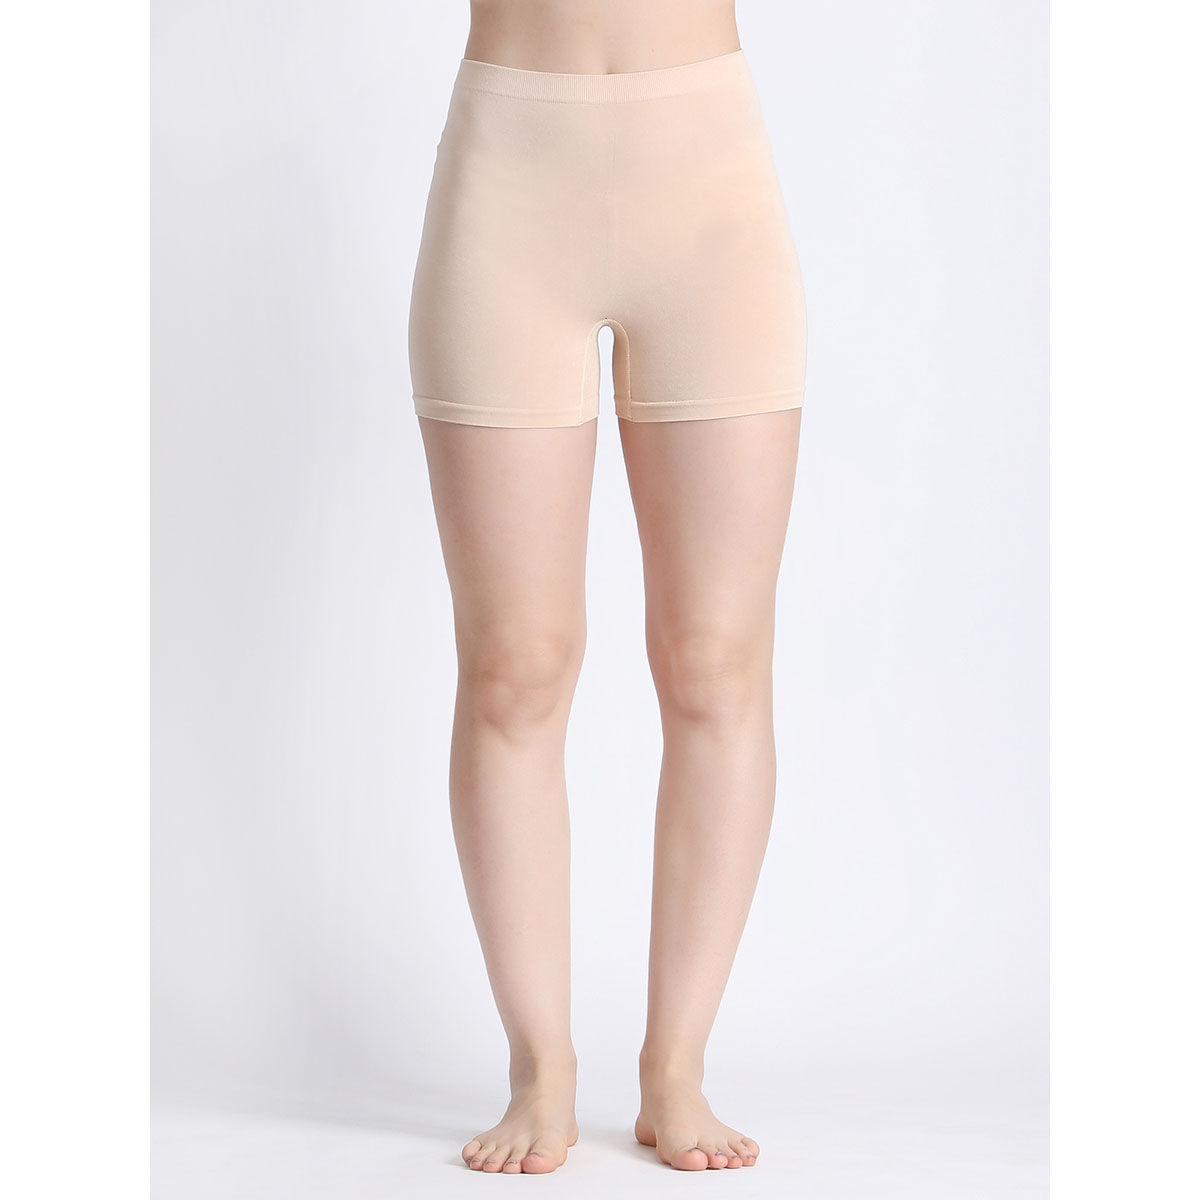 Buy NEXT2SKIN Women Under Dress Cycling Shorts with An Elastic